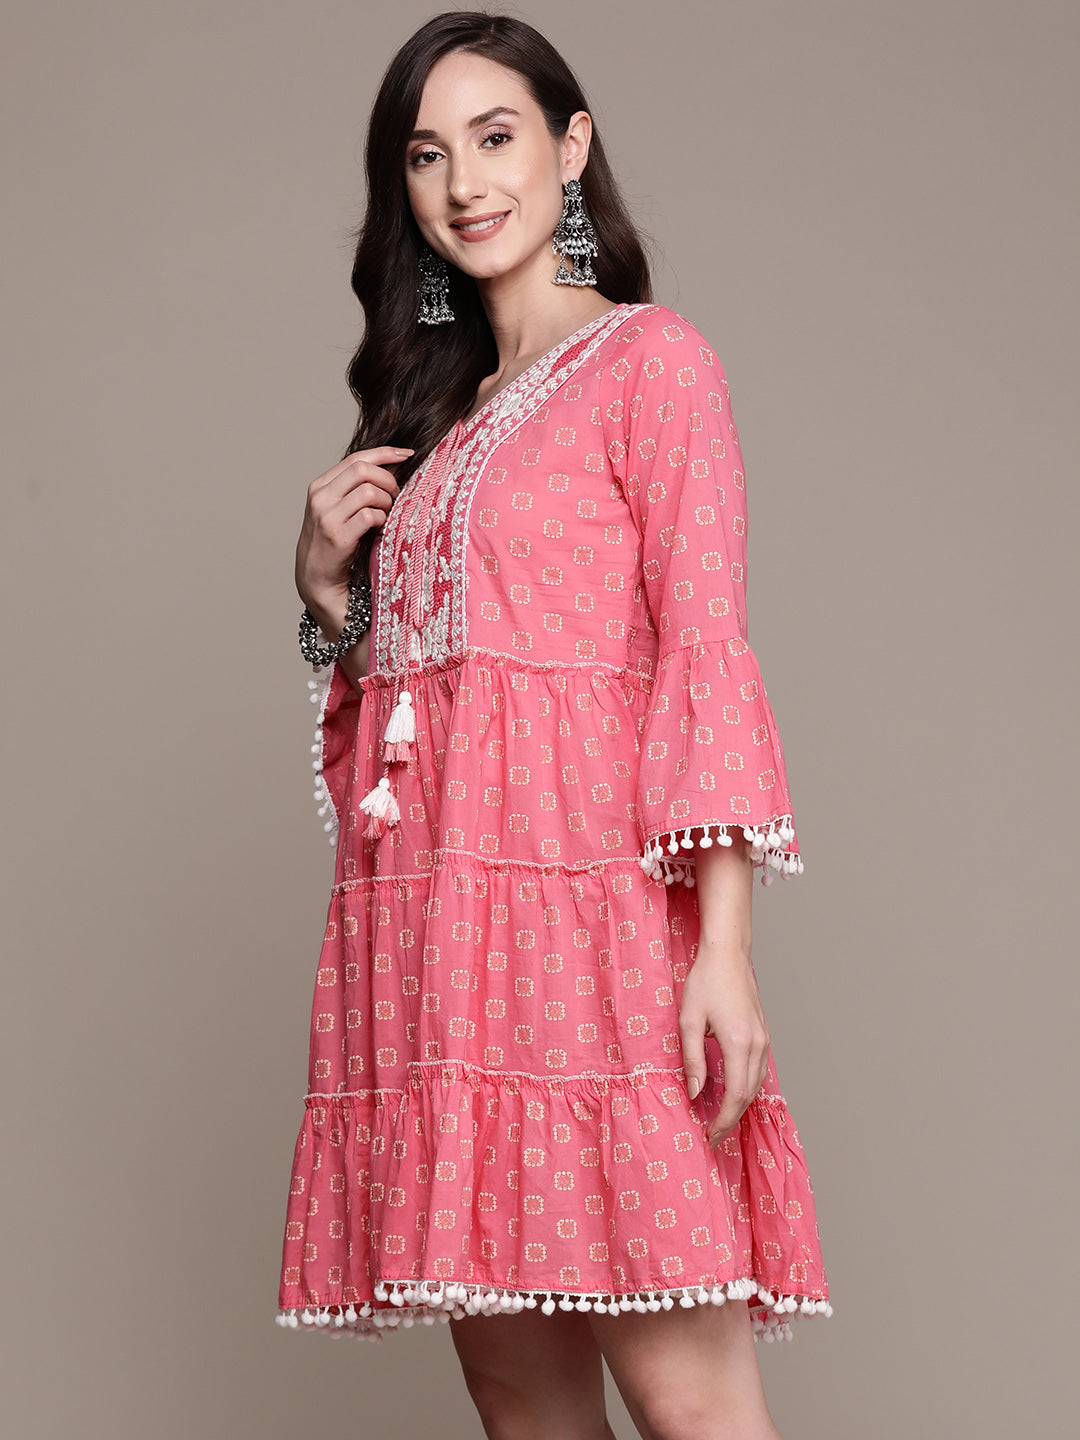 Ishin Women's Pink Embroidered A-Line Tiered Dress